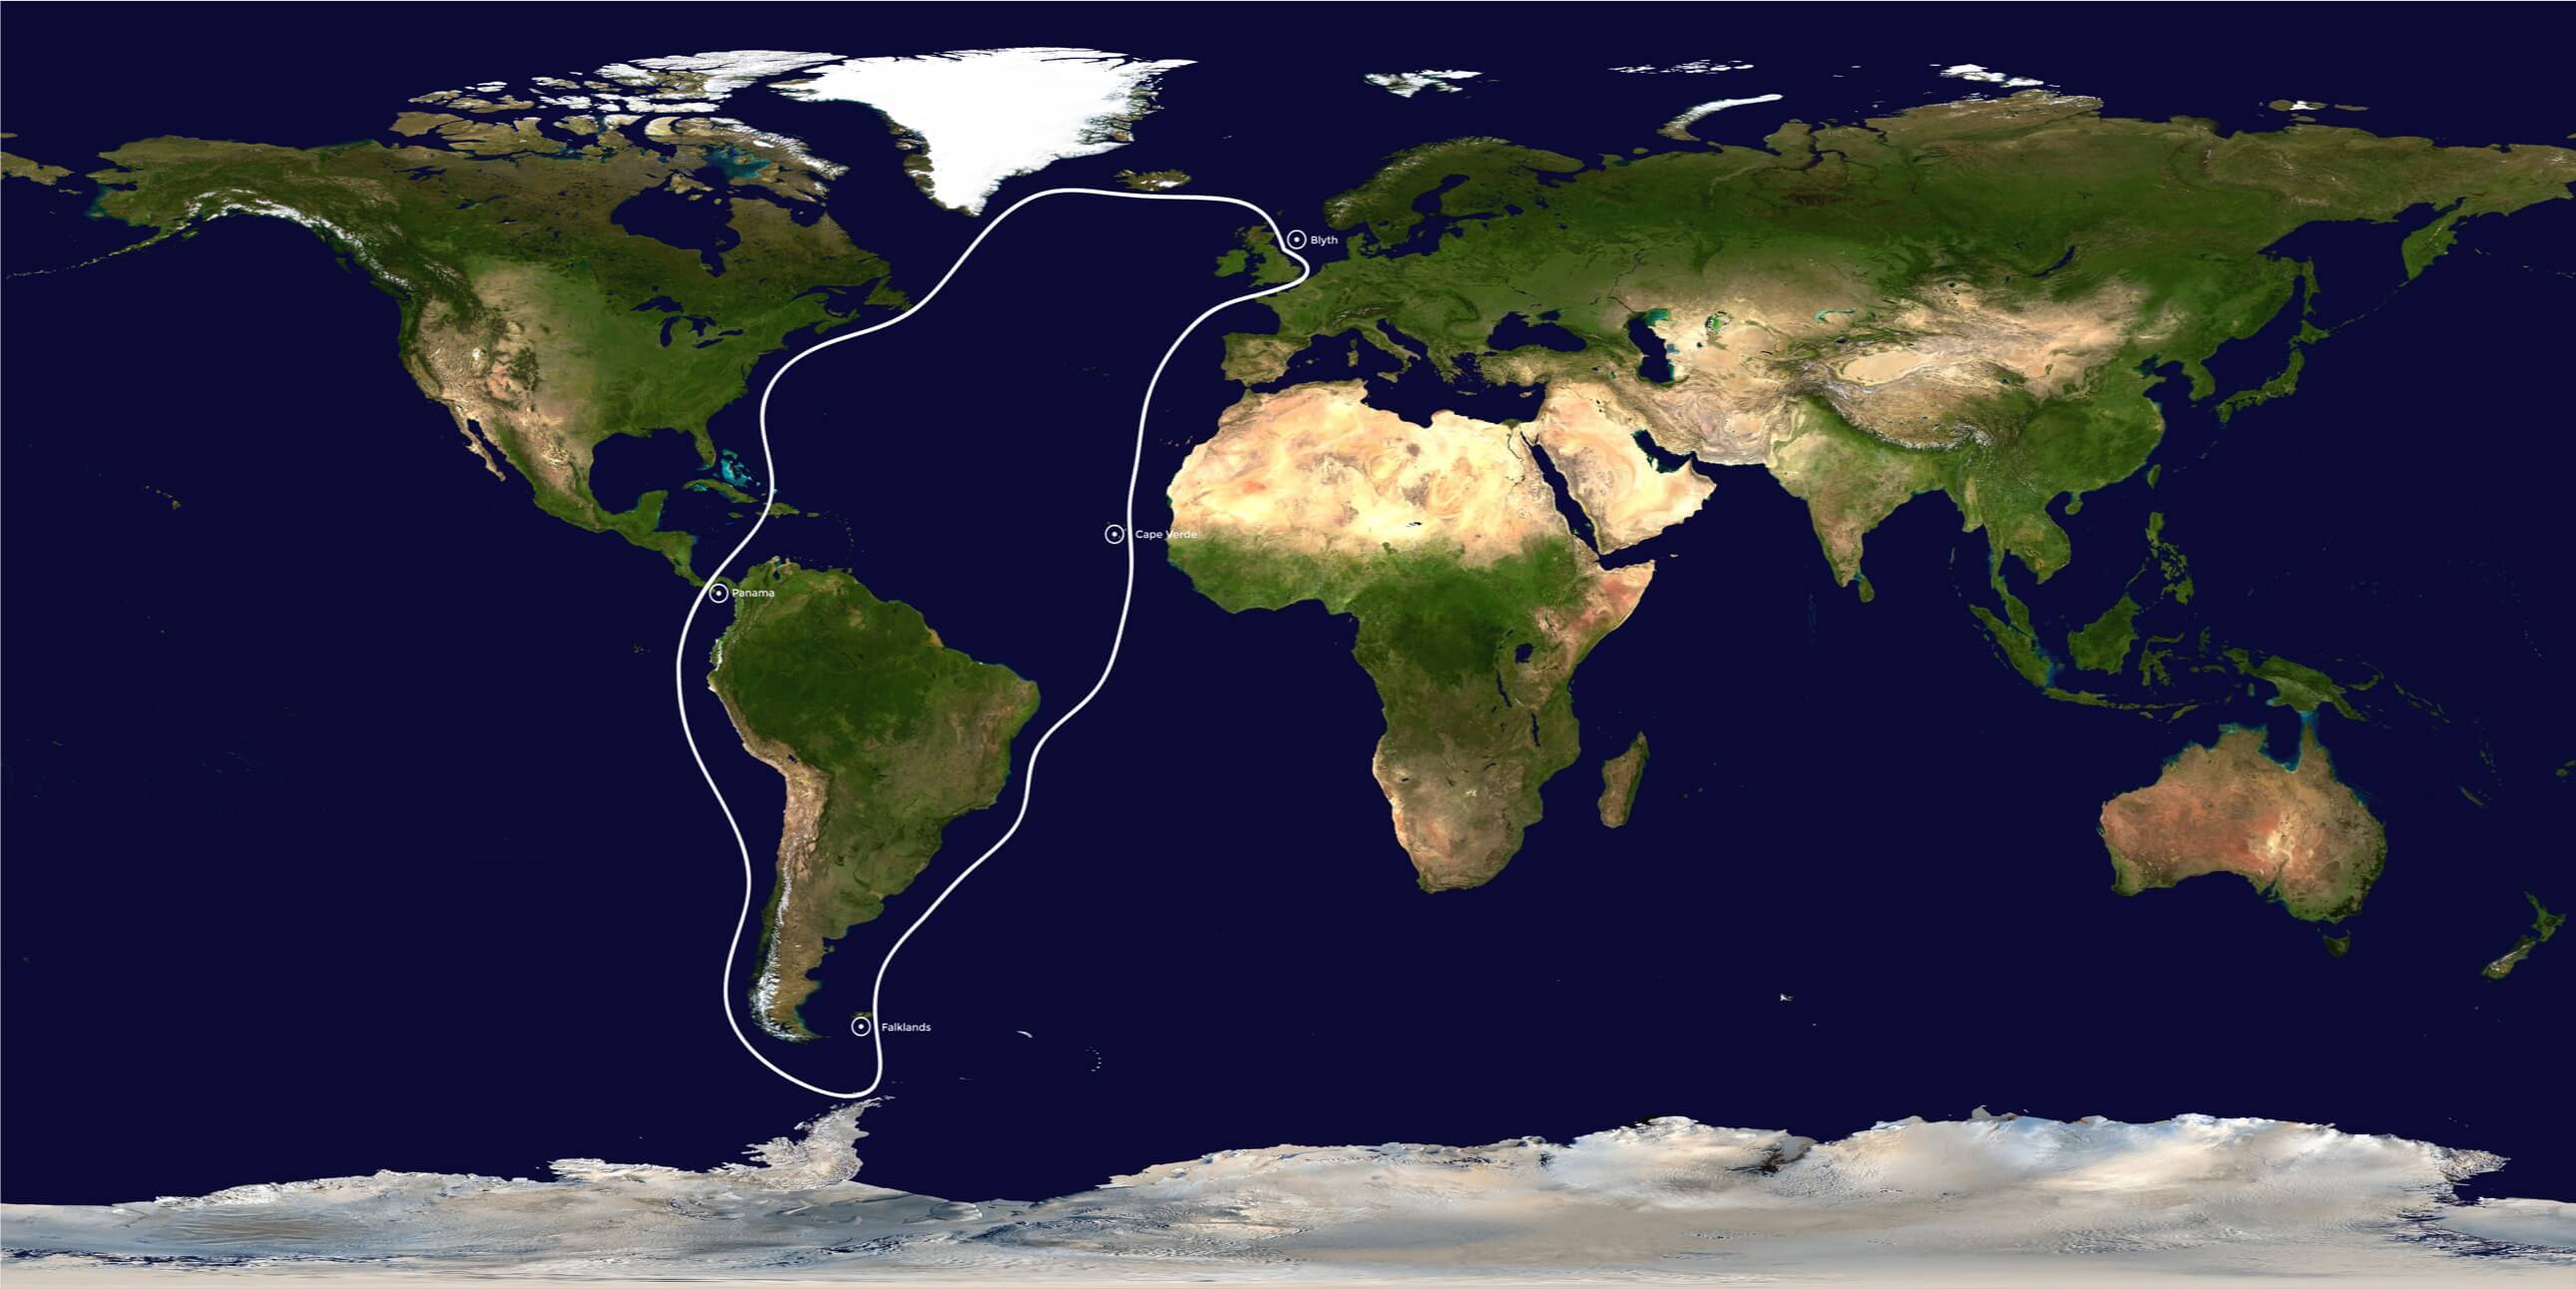 Voyage Route for Williams Expedition